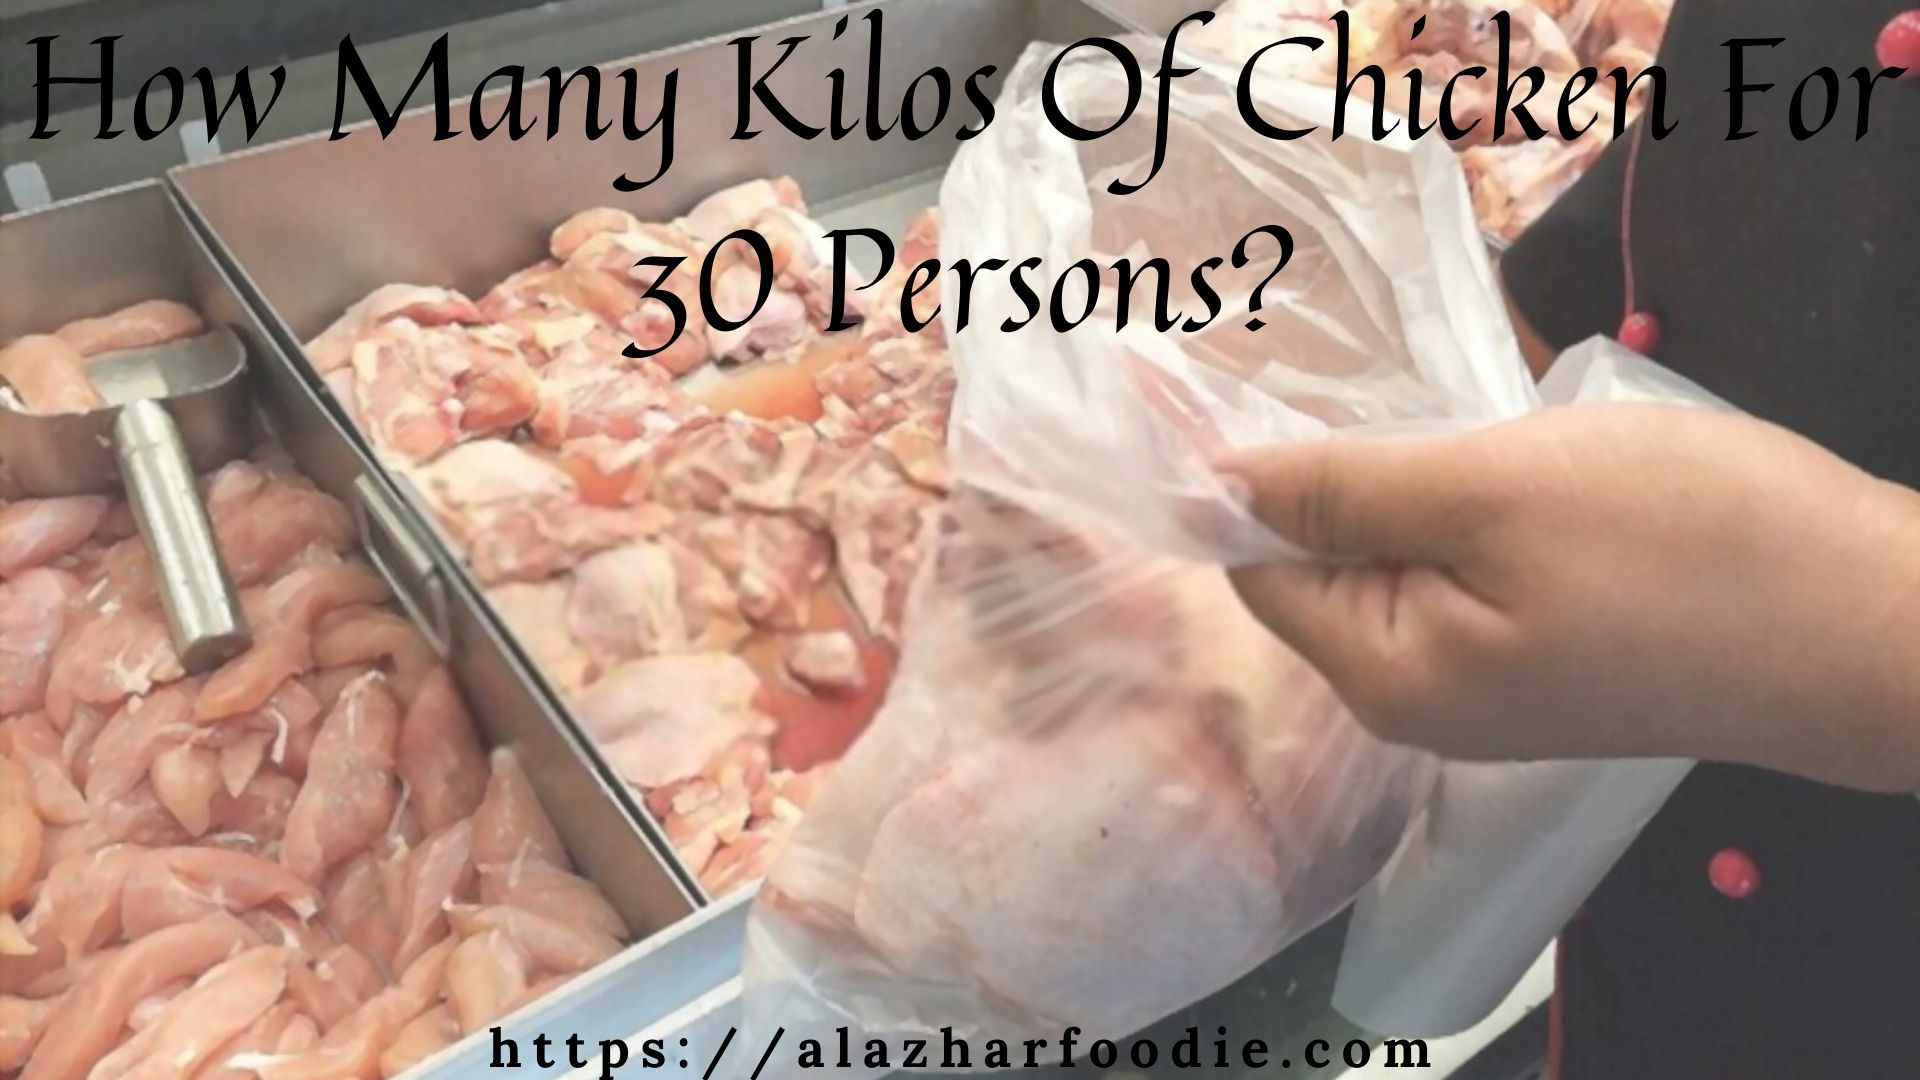 How Many Kilos Of Chicken For 50 Persons?